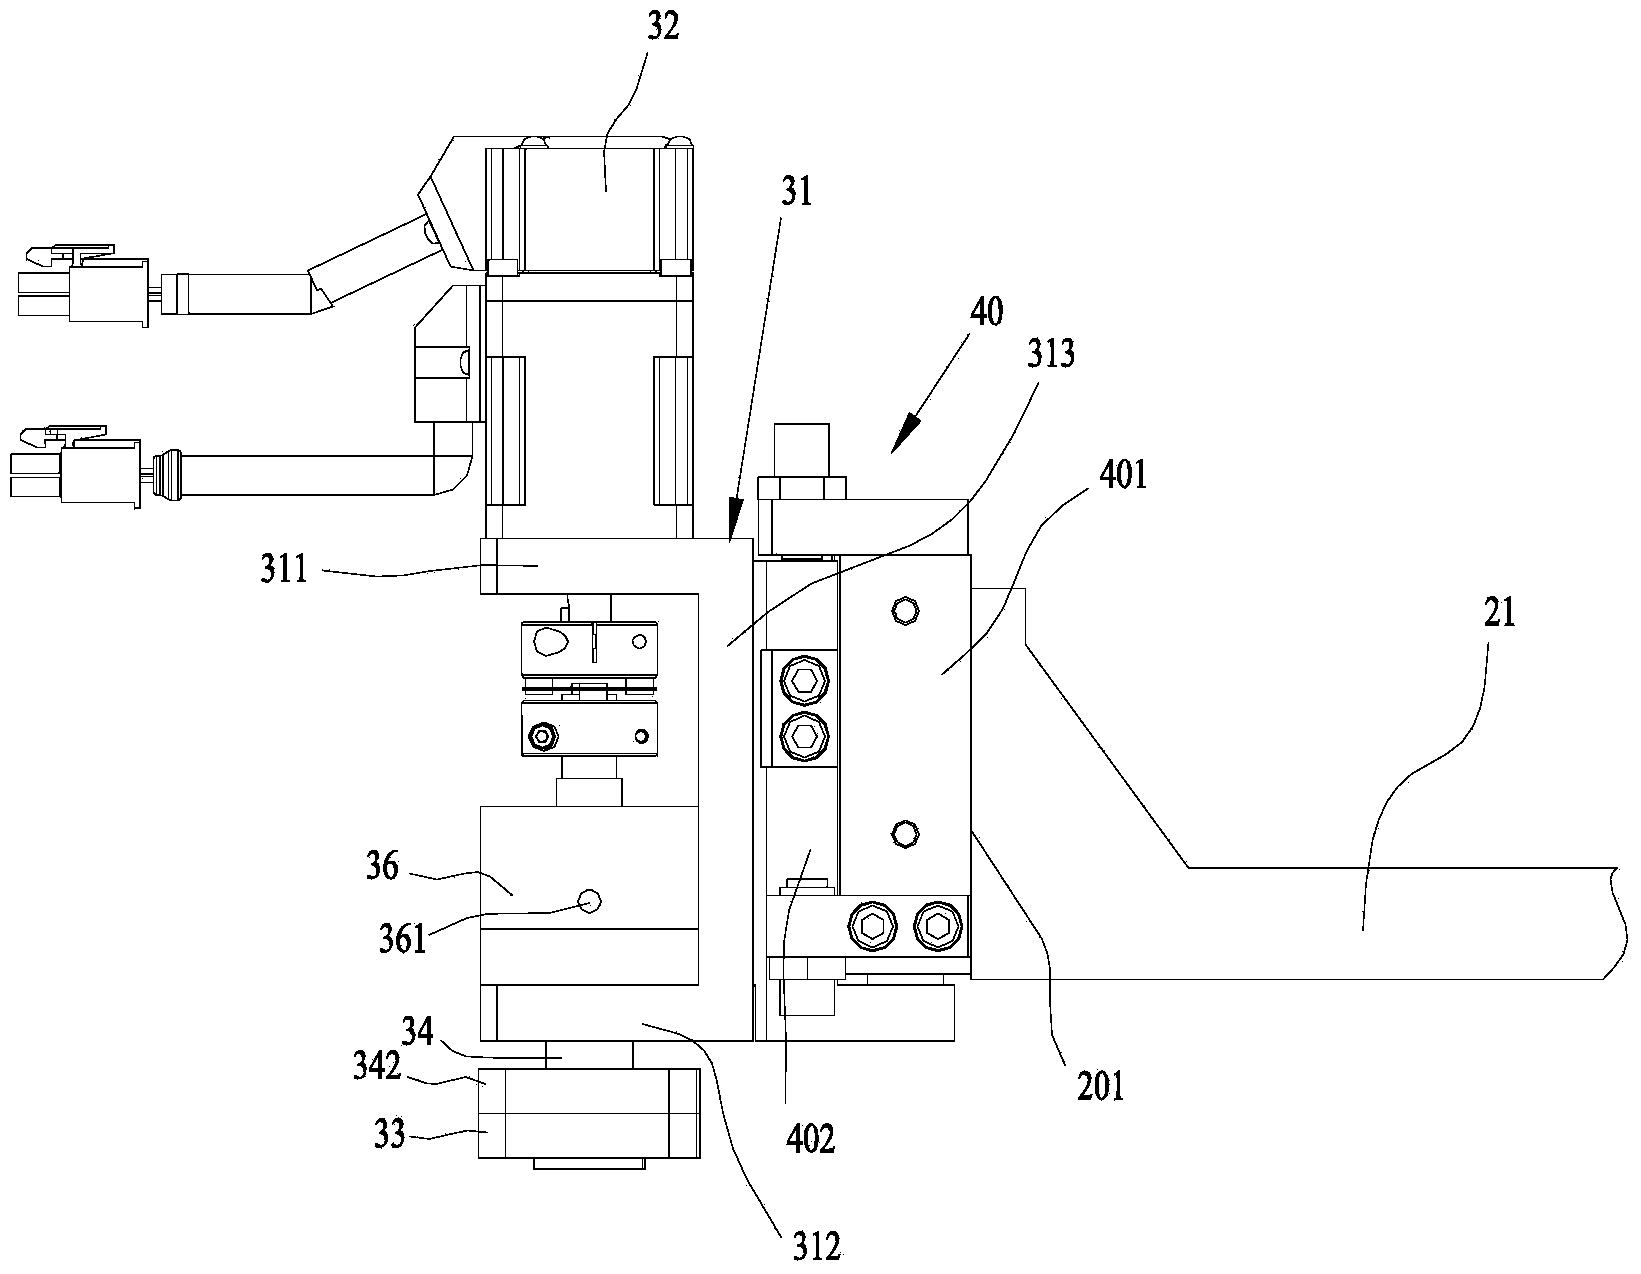 Reinforcing laminating device for flexible printed circuit board